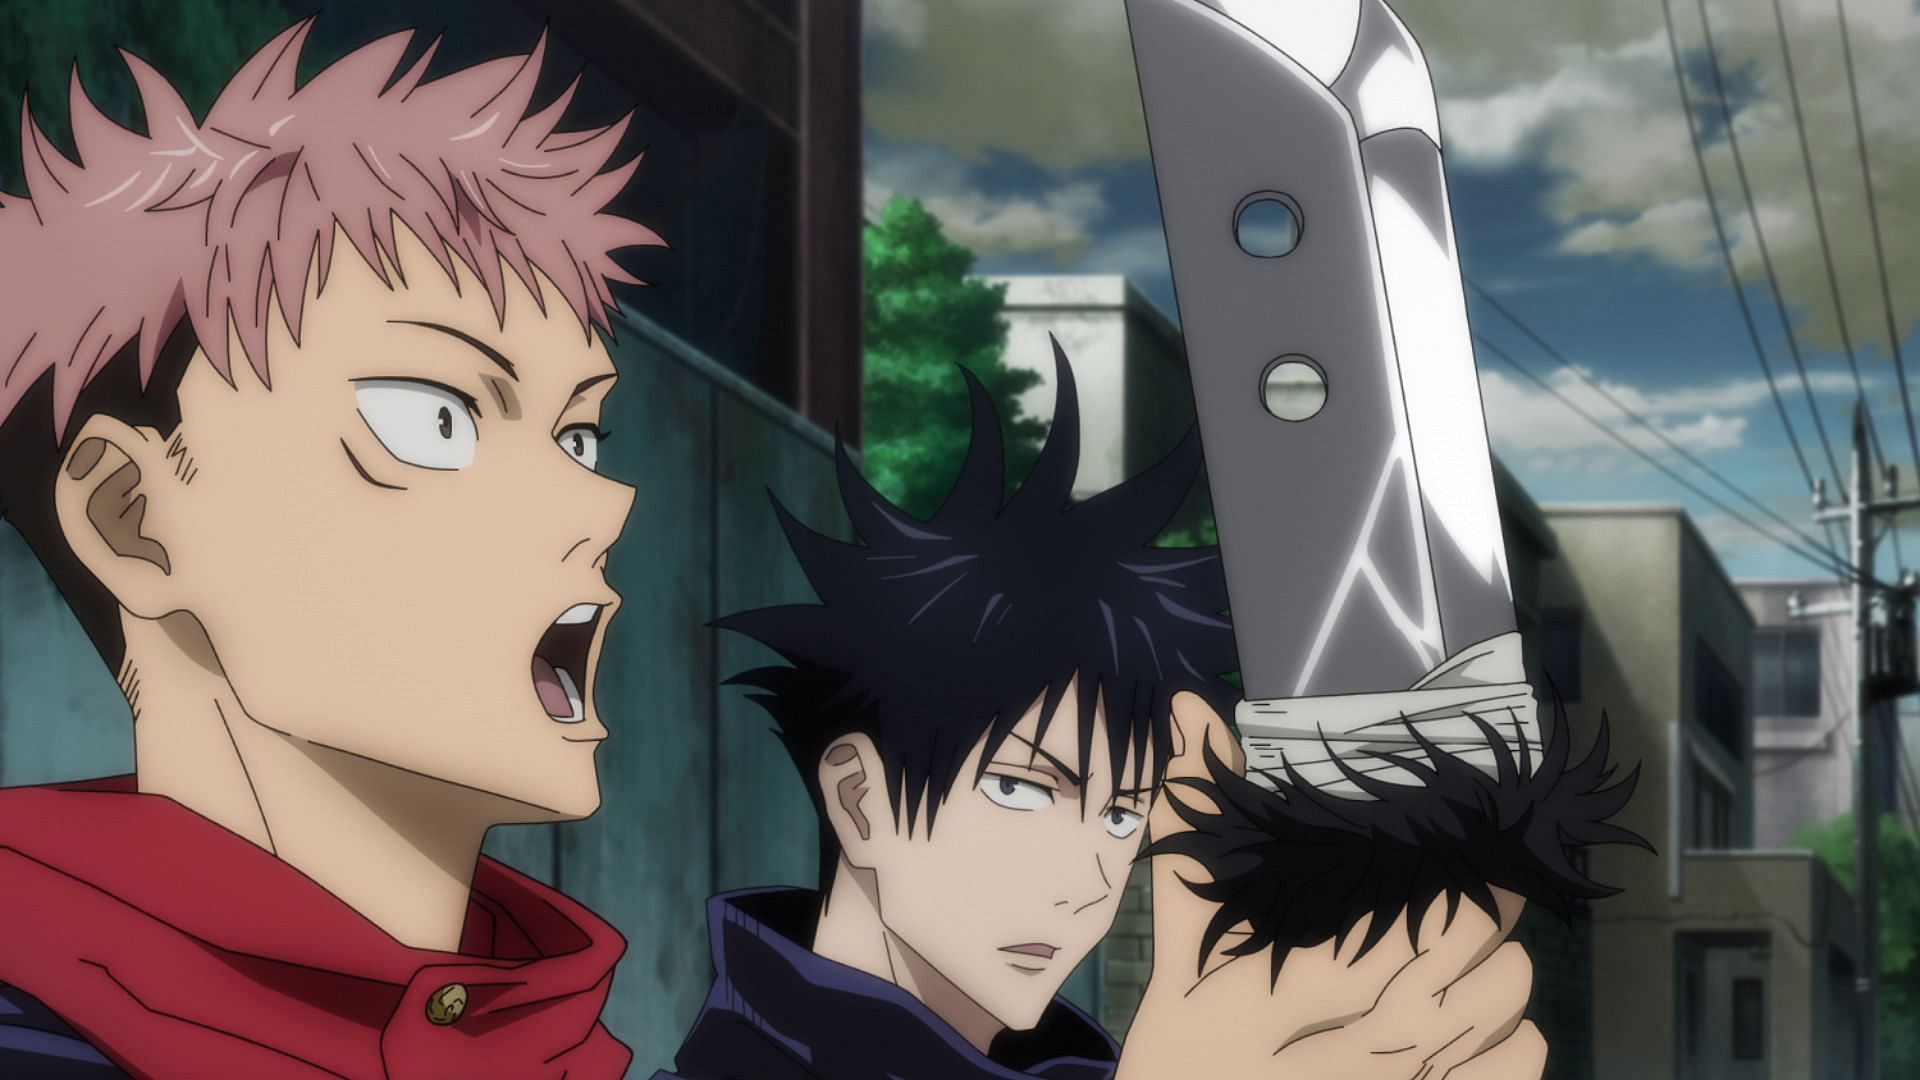 Jujutsu Kaisen chapter 248 preview confirms Yuji inherited a lethal weapon (Image via MAPPA Studios)